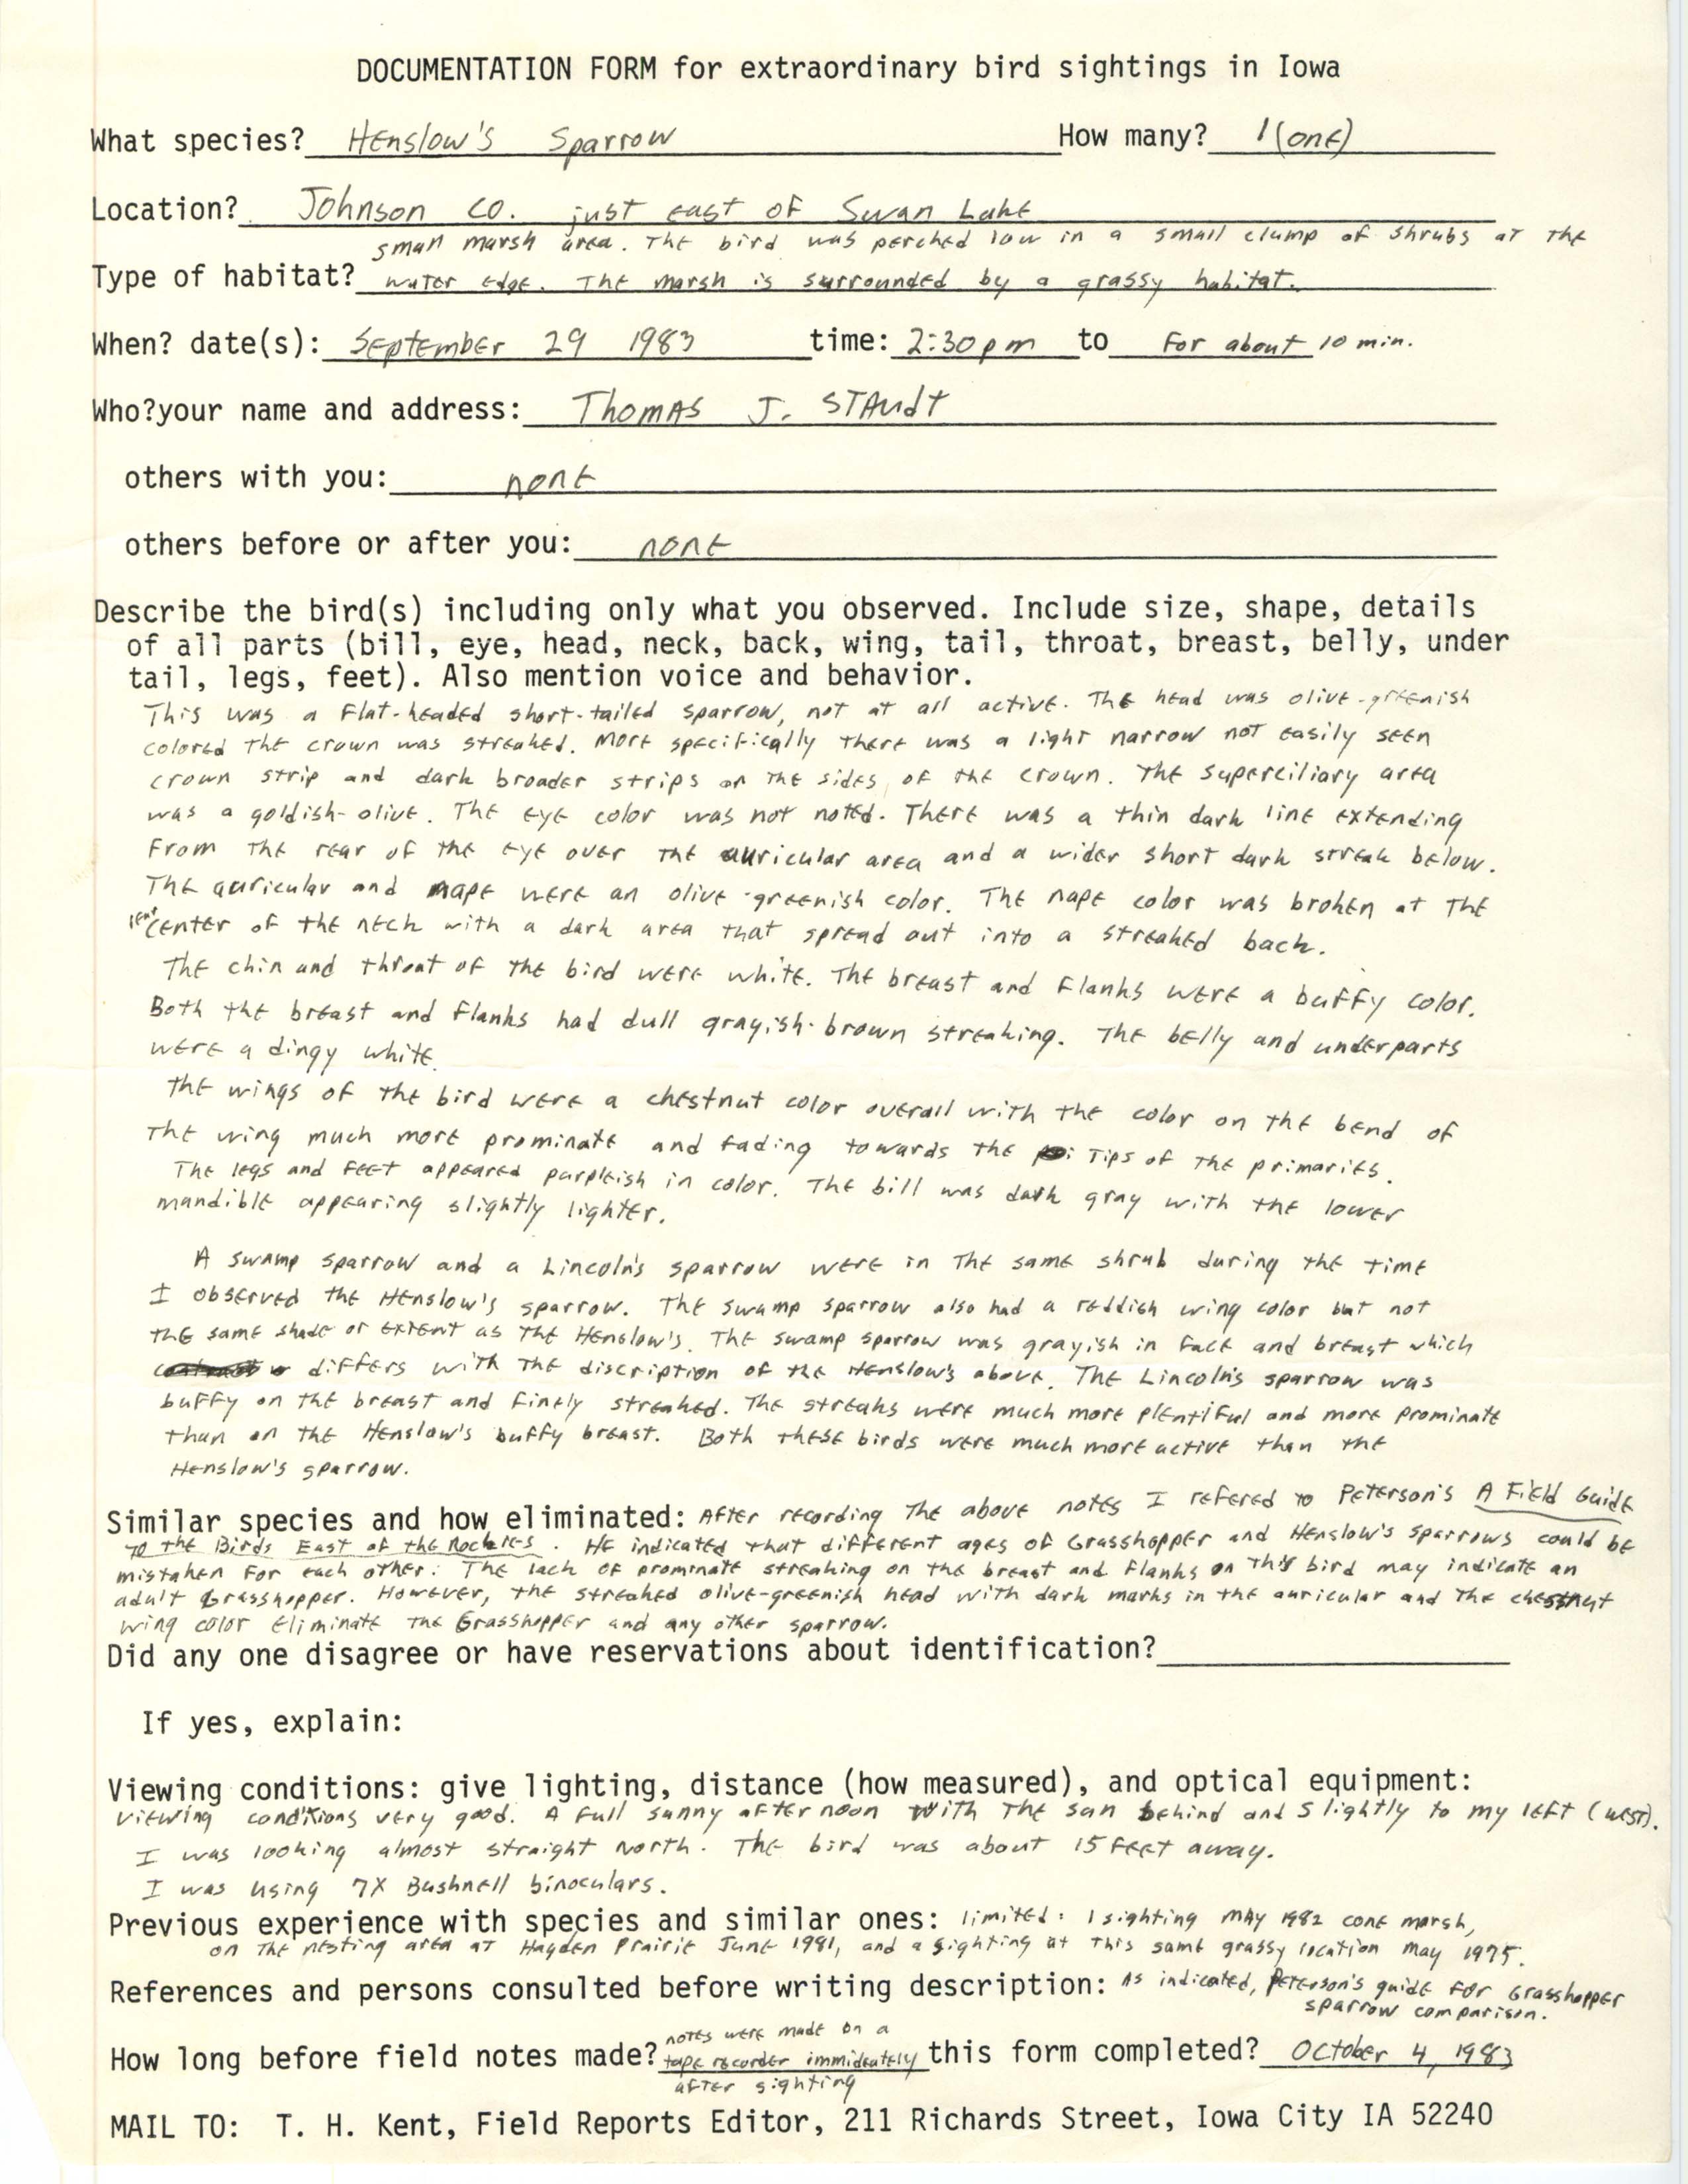 Rare bird documentation form for Henslow's Sparrow east of Swan Lake in Johnson County, 1983